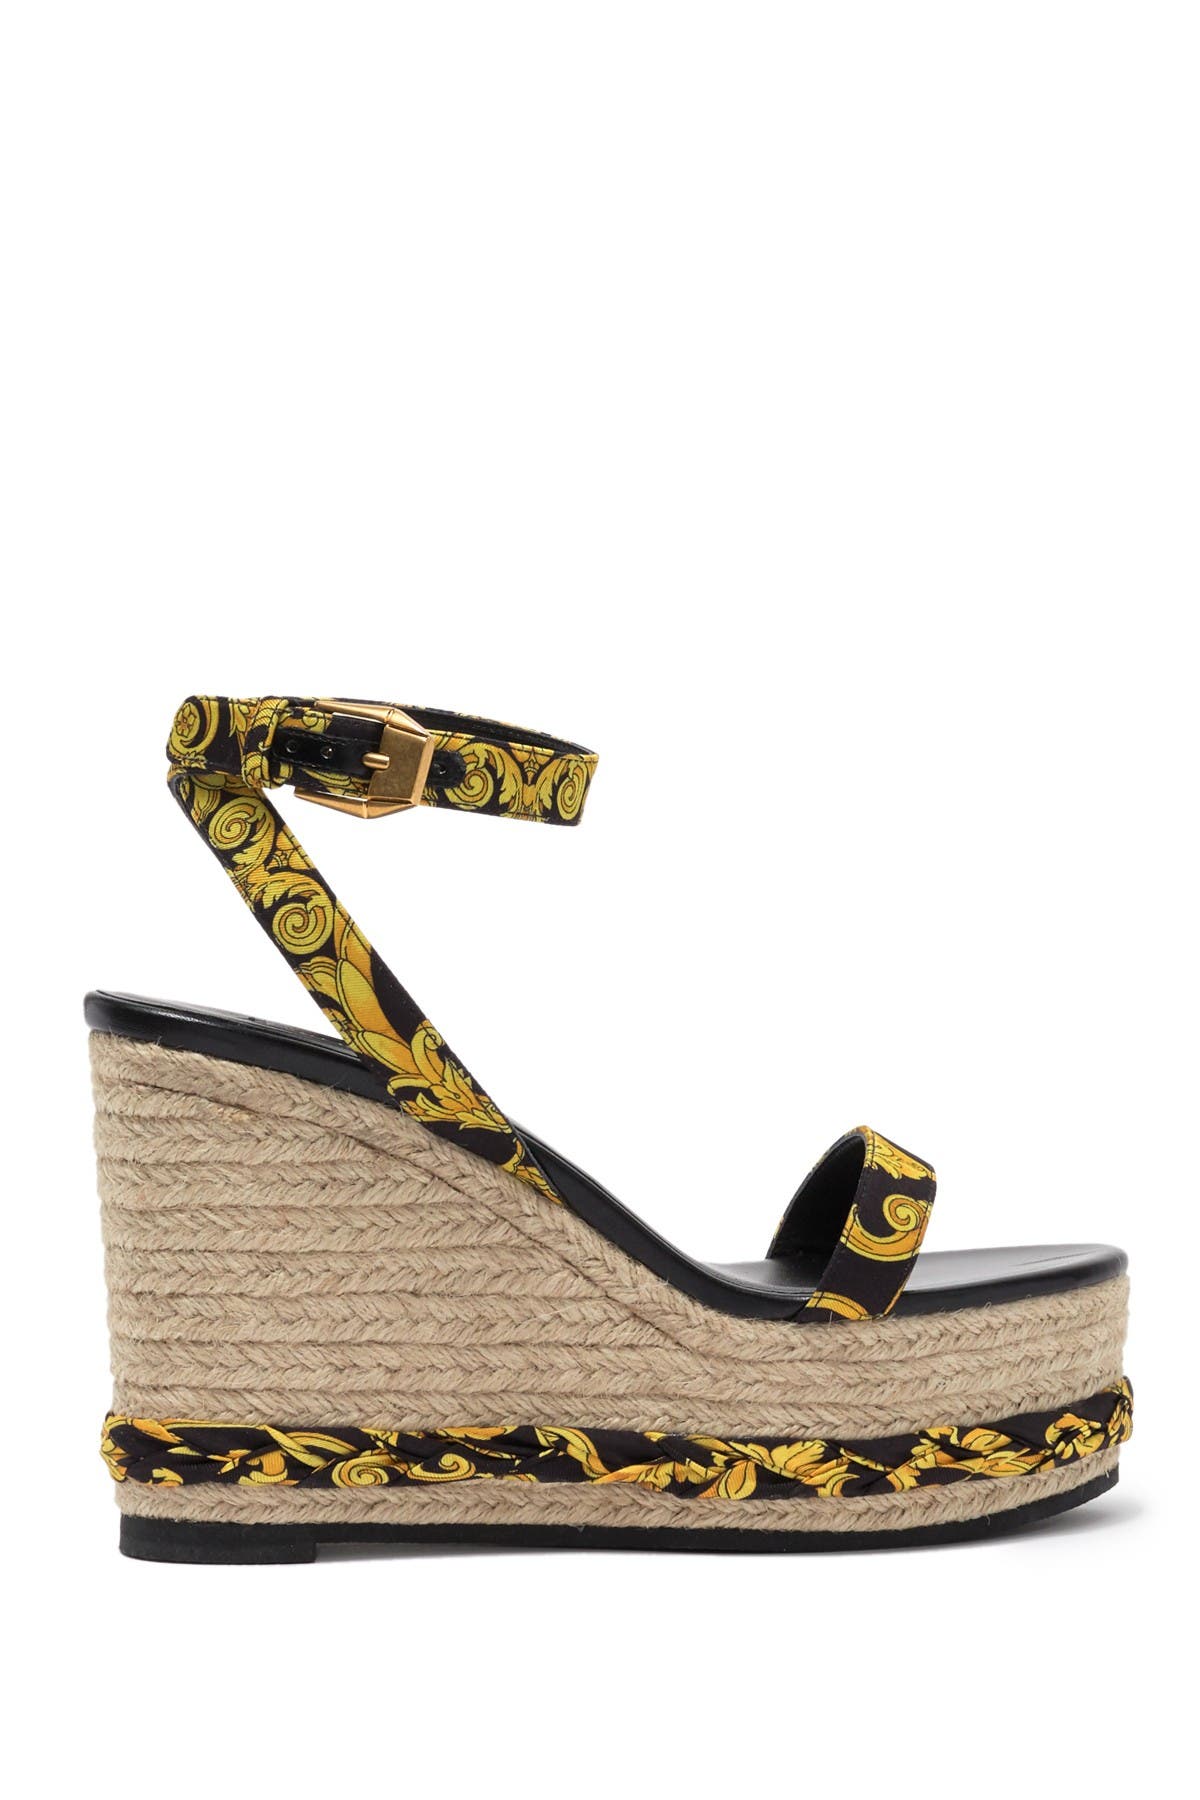 versace wedges shoes